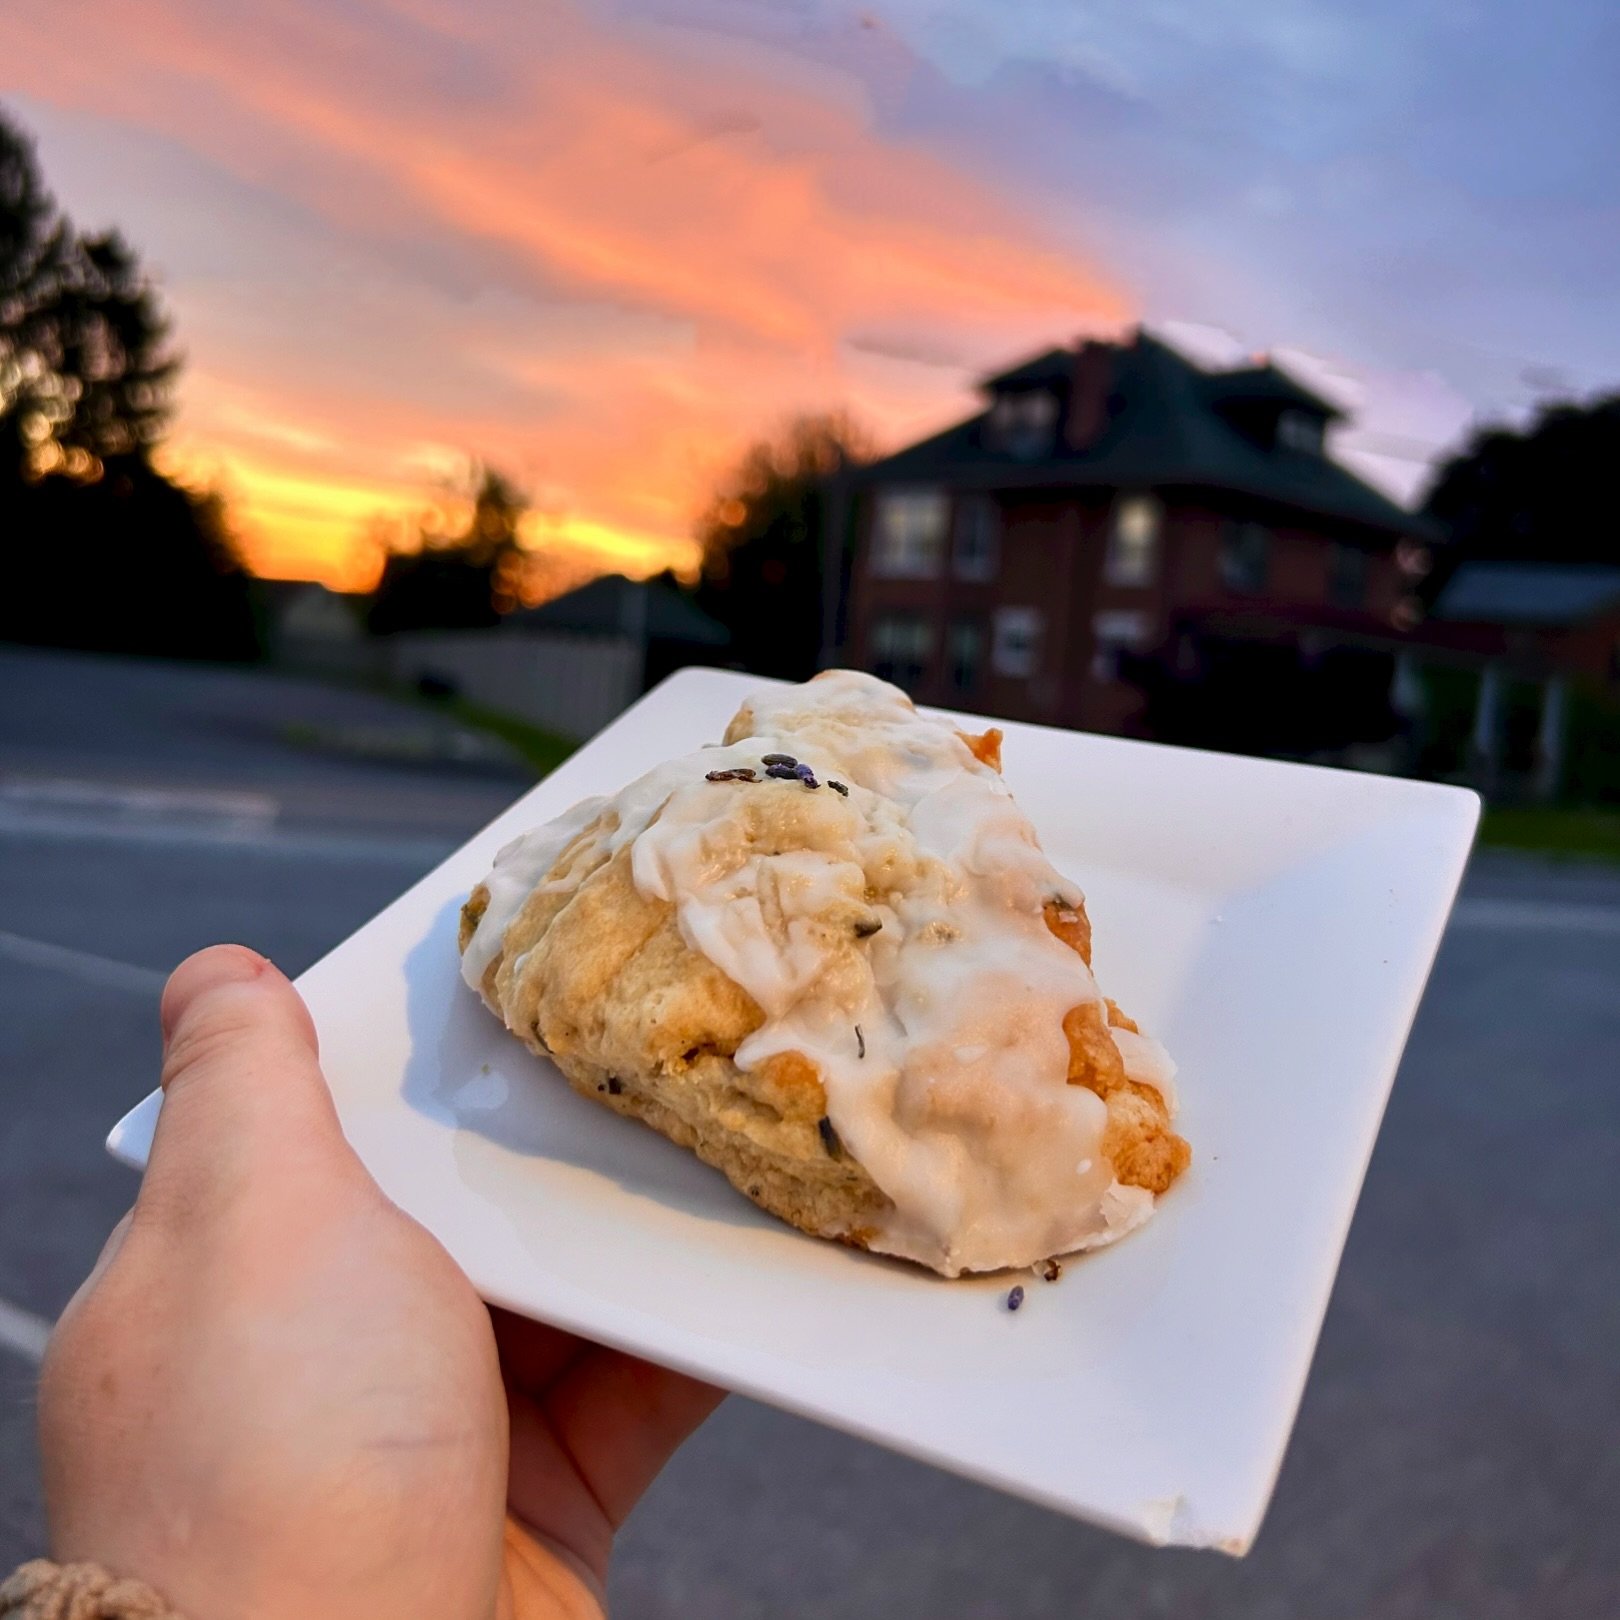 Our Lavender Vanilla Scone greeted the sunrise today. Have you tried one of these flavors bites  @strasburgbakery yet?

#bakedgoodies #scones #joeonthegocoffeeco #servingyourcommunitybyservingyou #siplocal #kindnessisfree